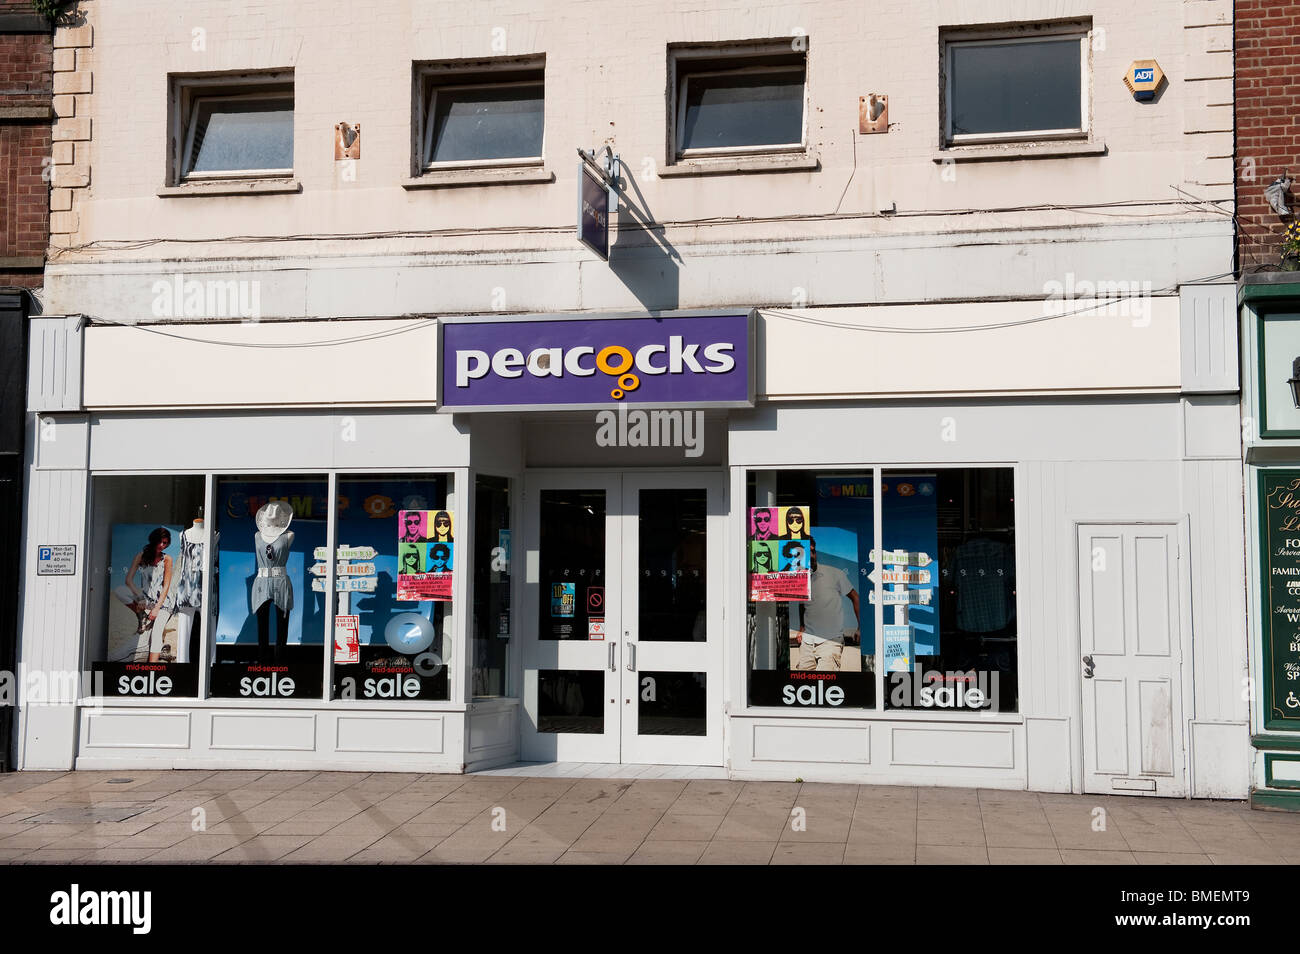 Peacocks clothing shop in an English town Stock Photo